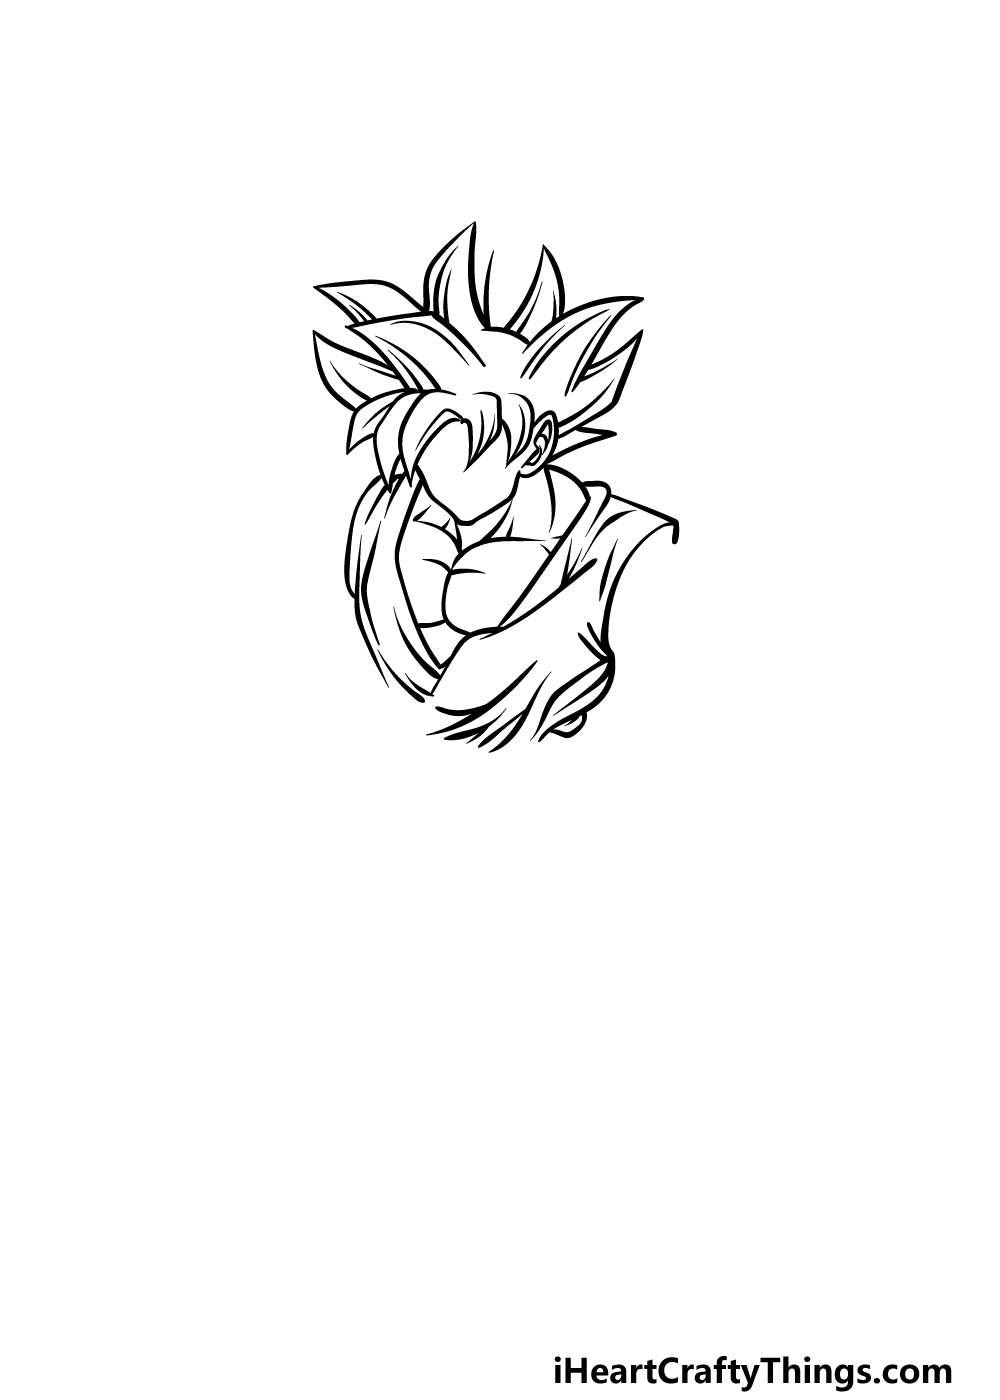 Drawing Goku - Step By Step - Cool Drawing Idea